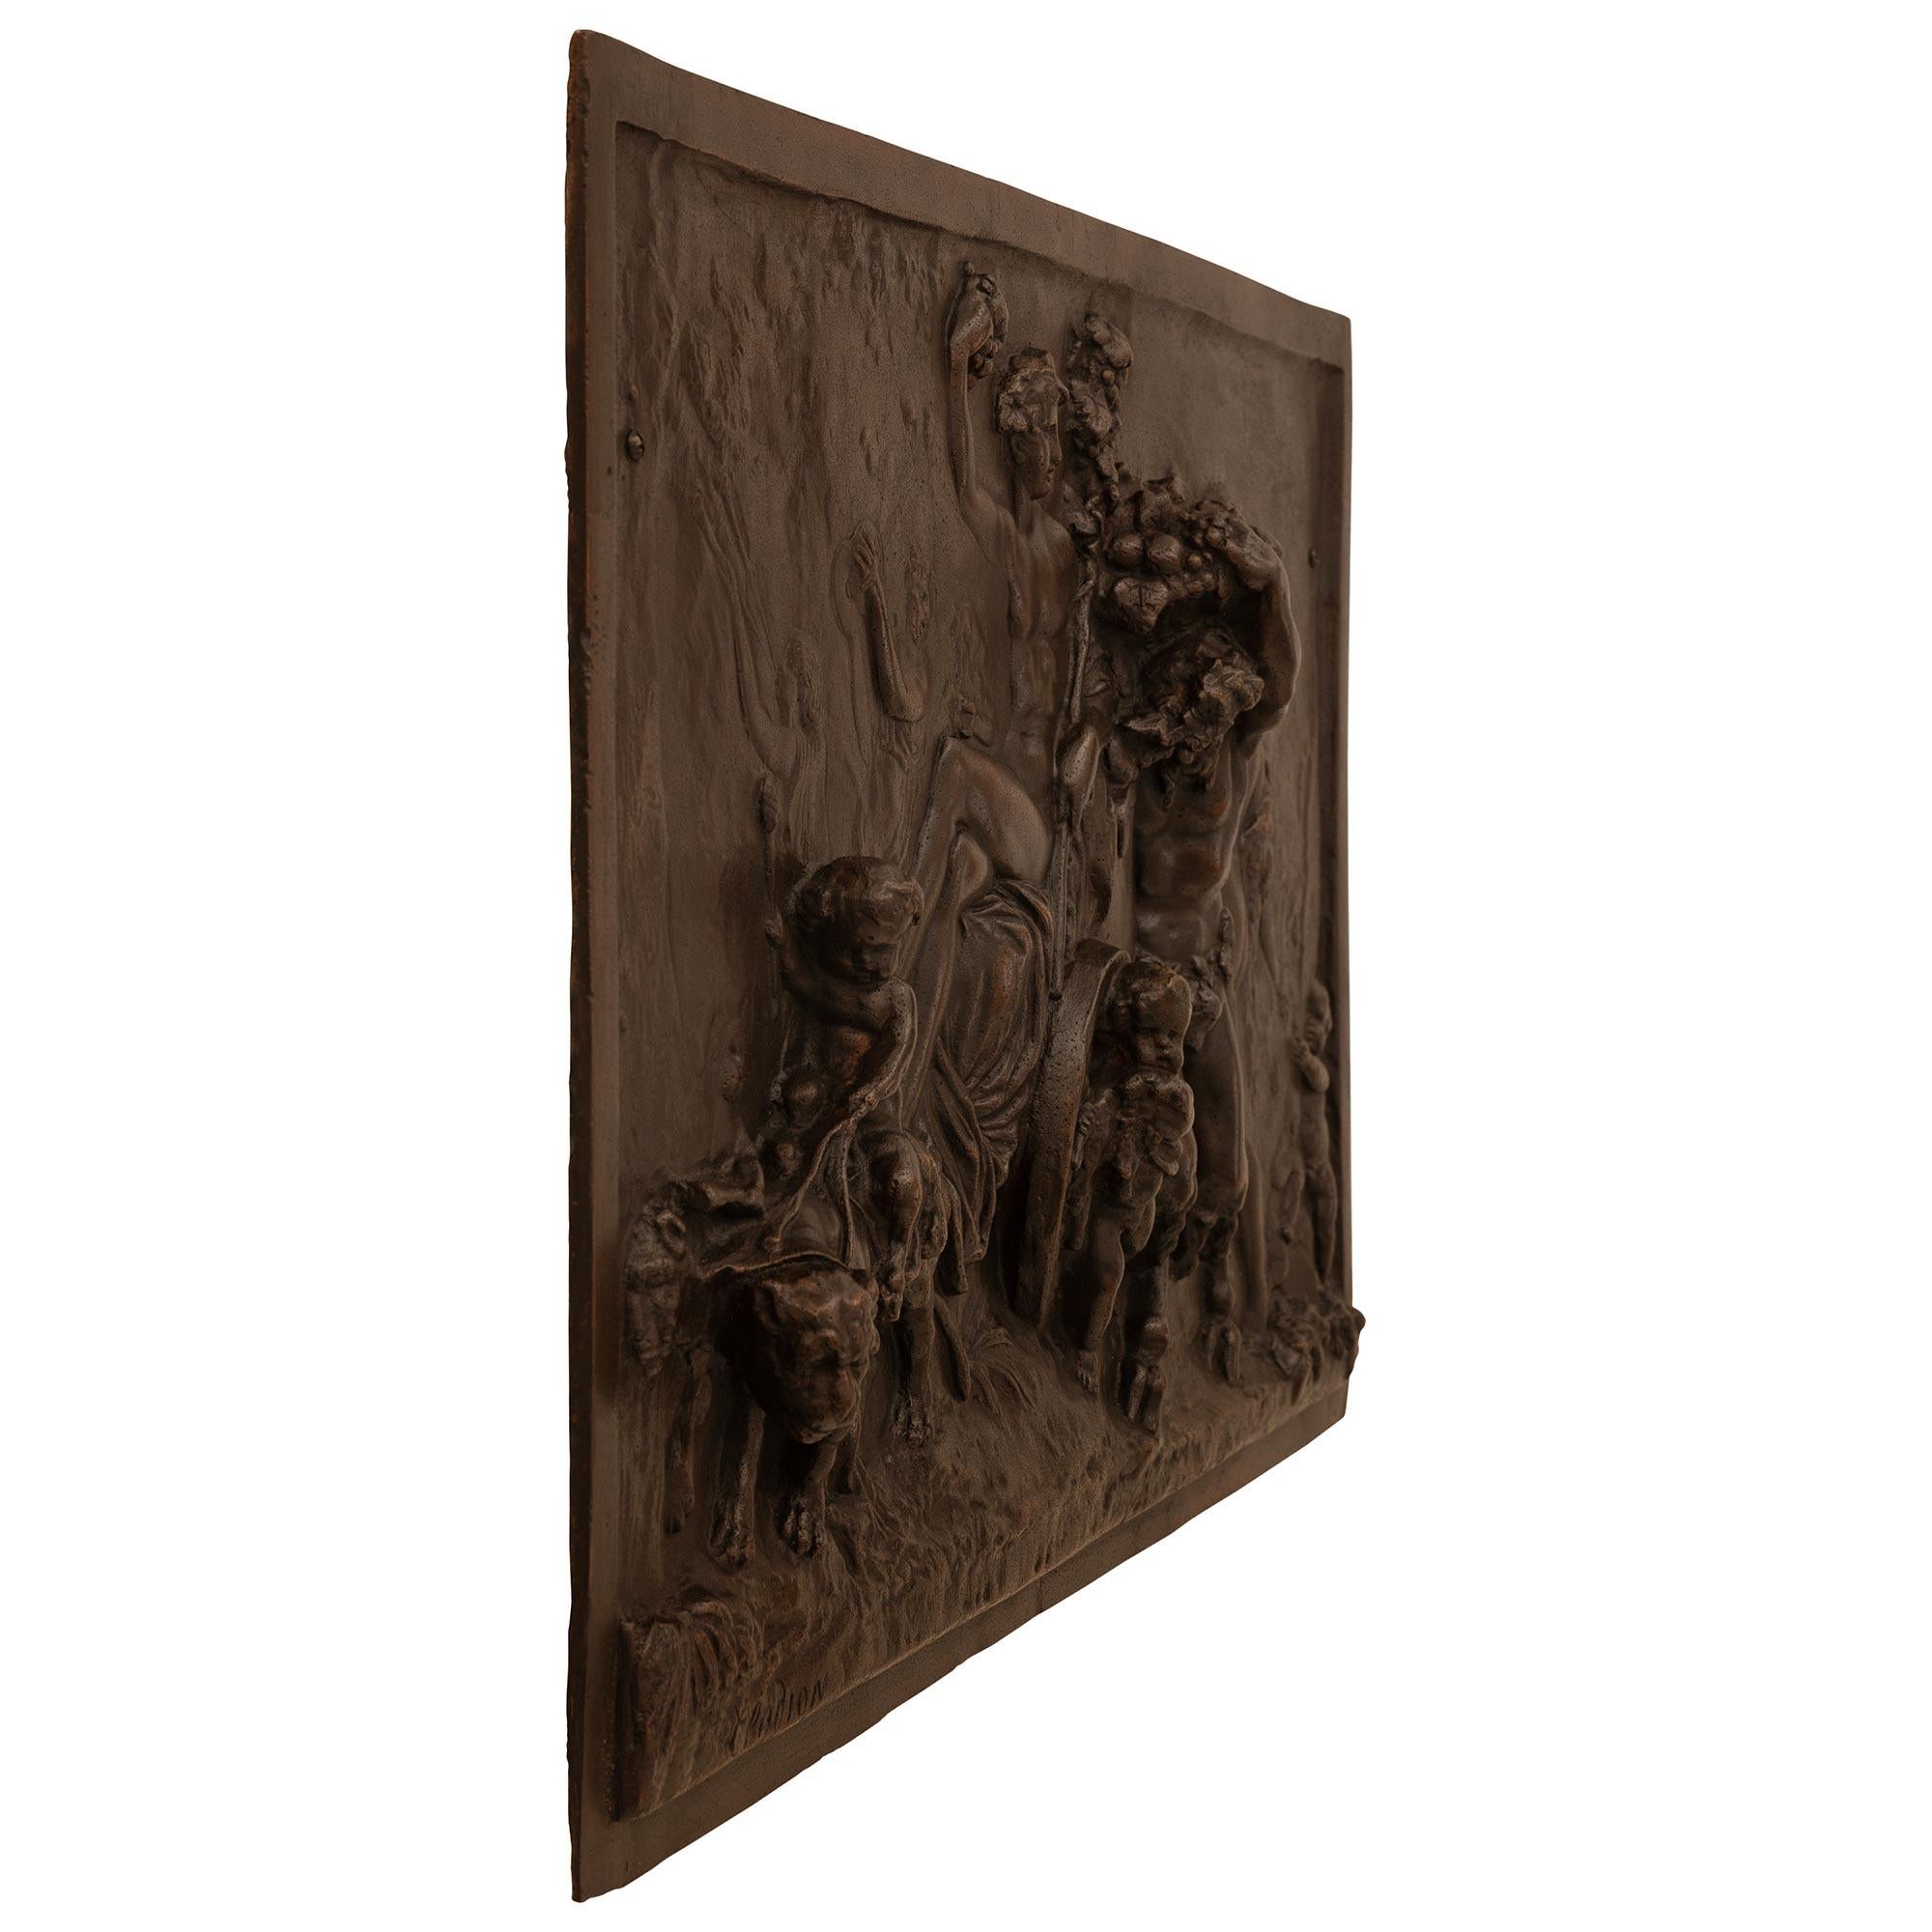 A wonderful and extremely decorative pair of French 19th century patinated Bronze plaques, after a model by Clodion. Each rectangular plaque depicts jovial scenes or cherubs playing with musical instruments, picking flowers, dancing and classical